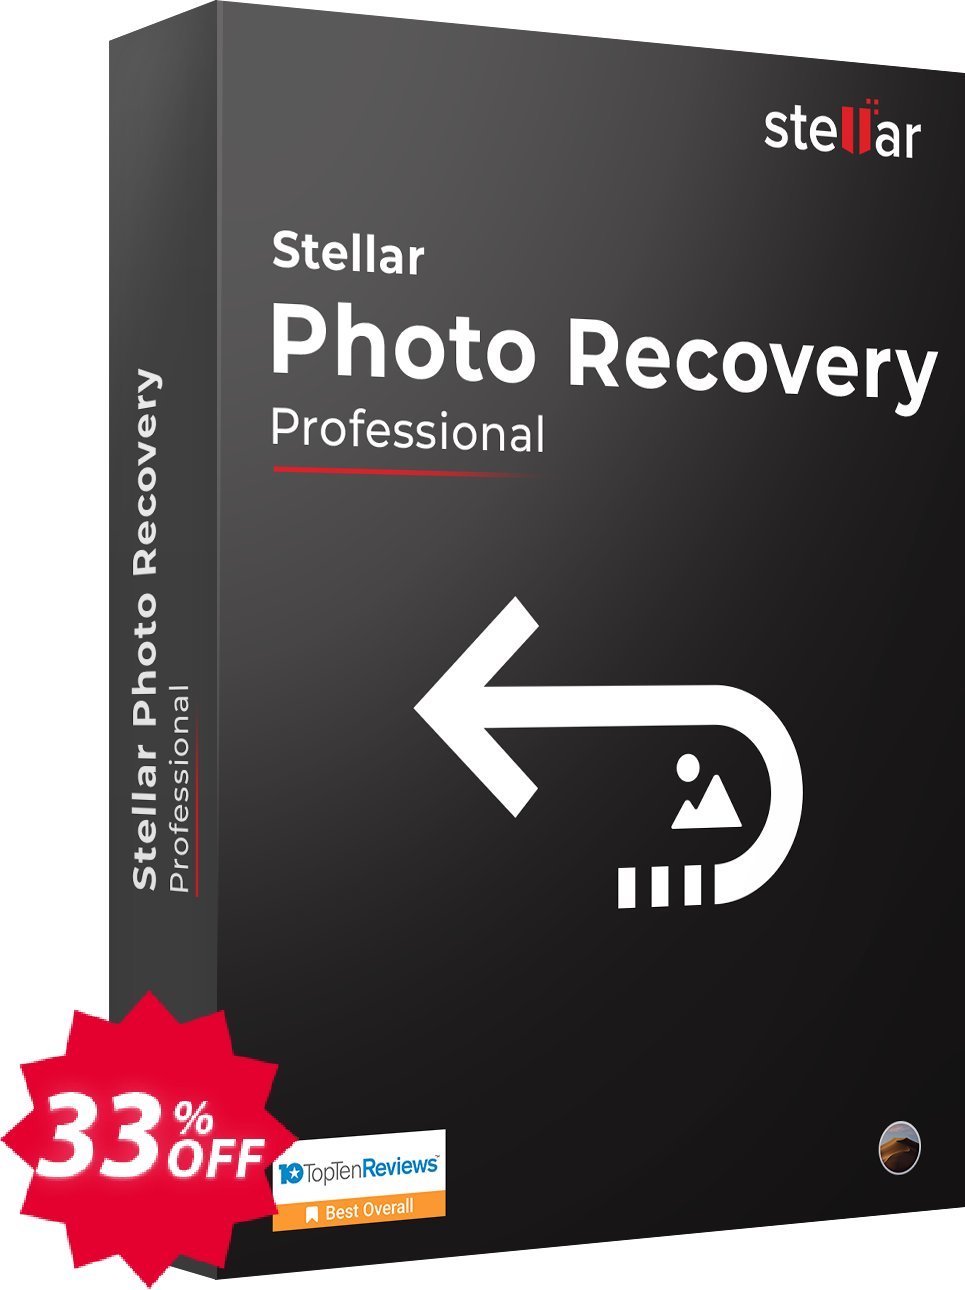 Stellar Photo Recovery Professional for MAC Coupon code 33% discount 